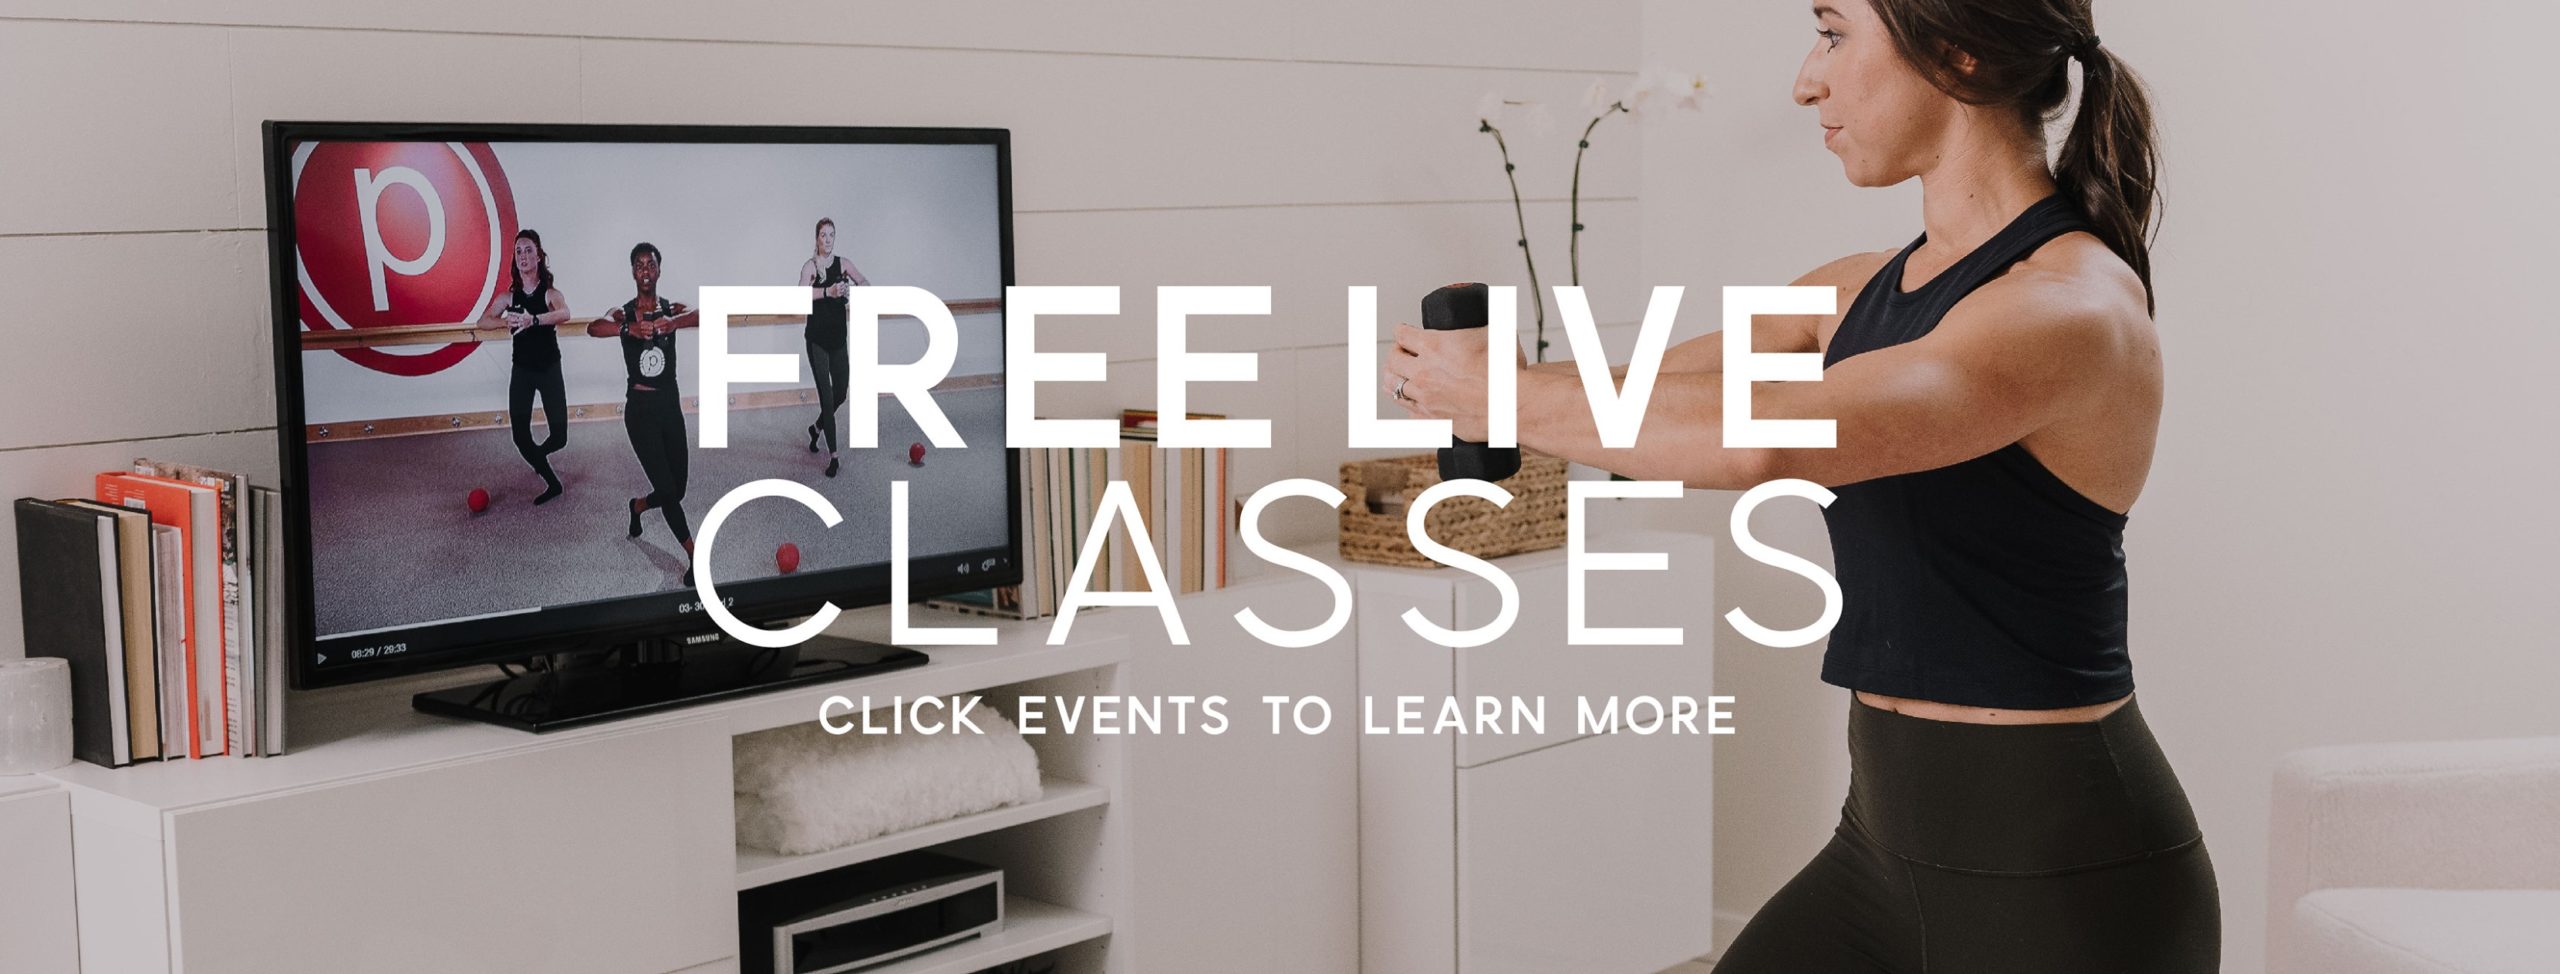 Free Virtual Fitness Classes at Home Online